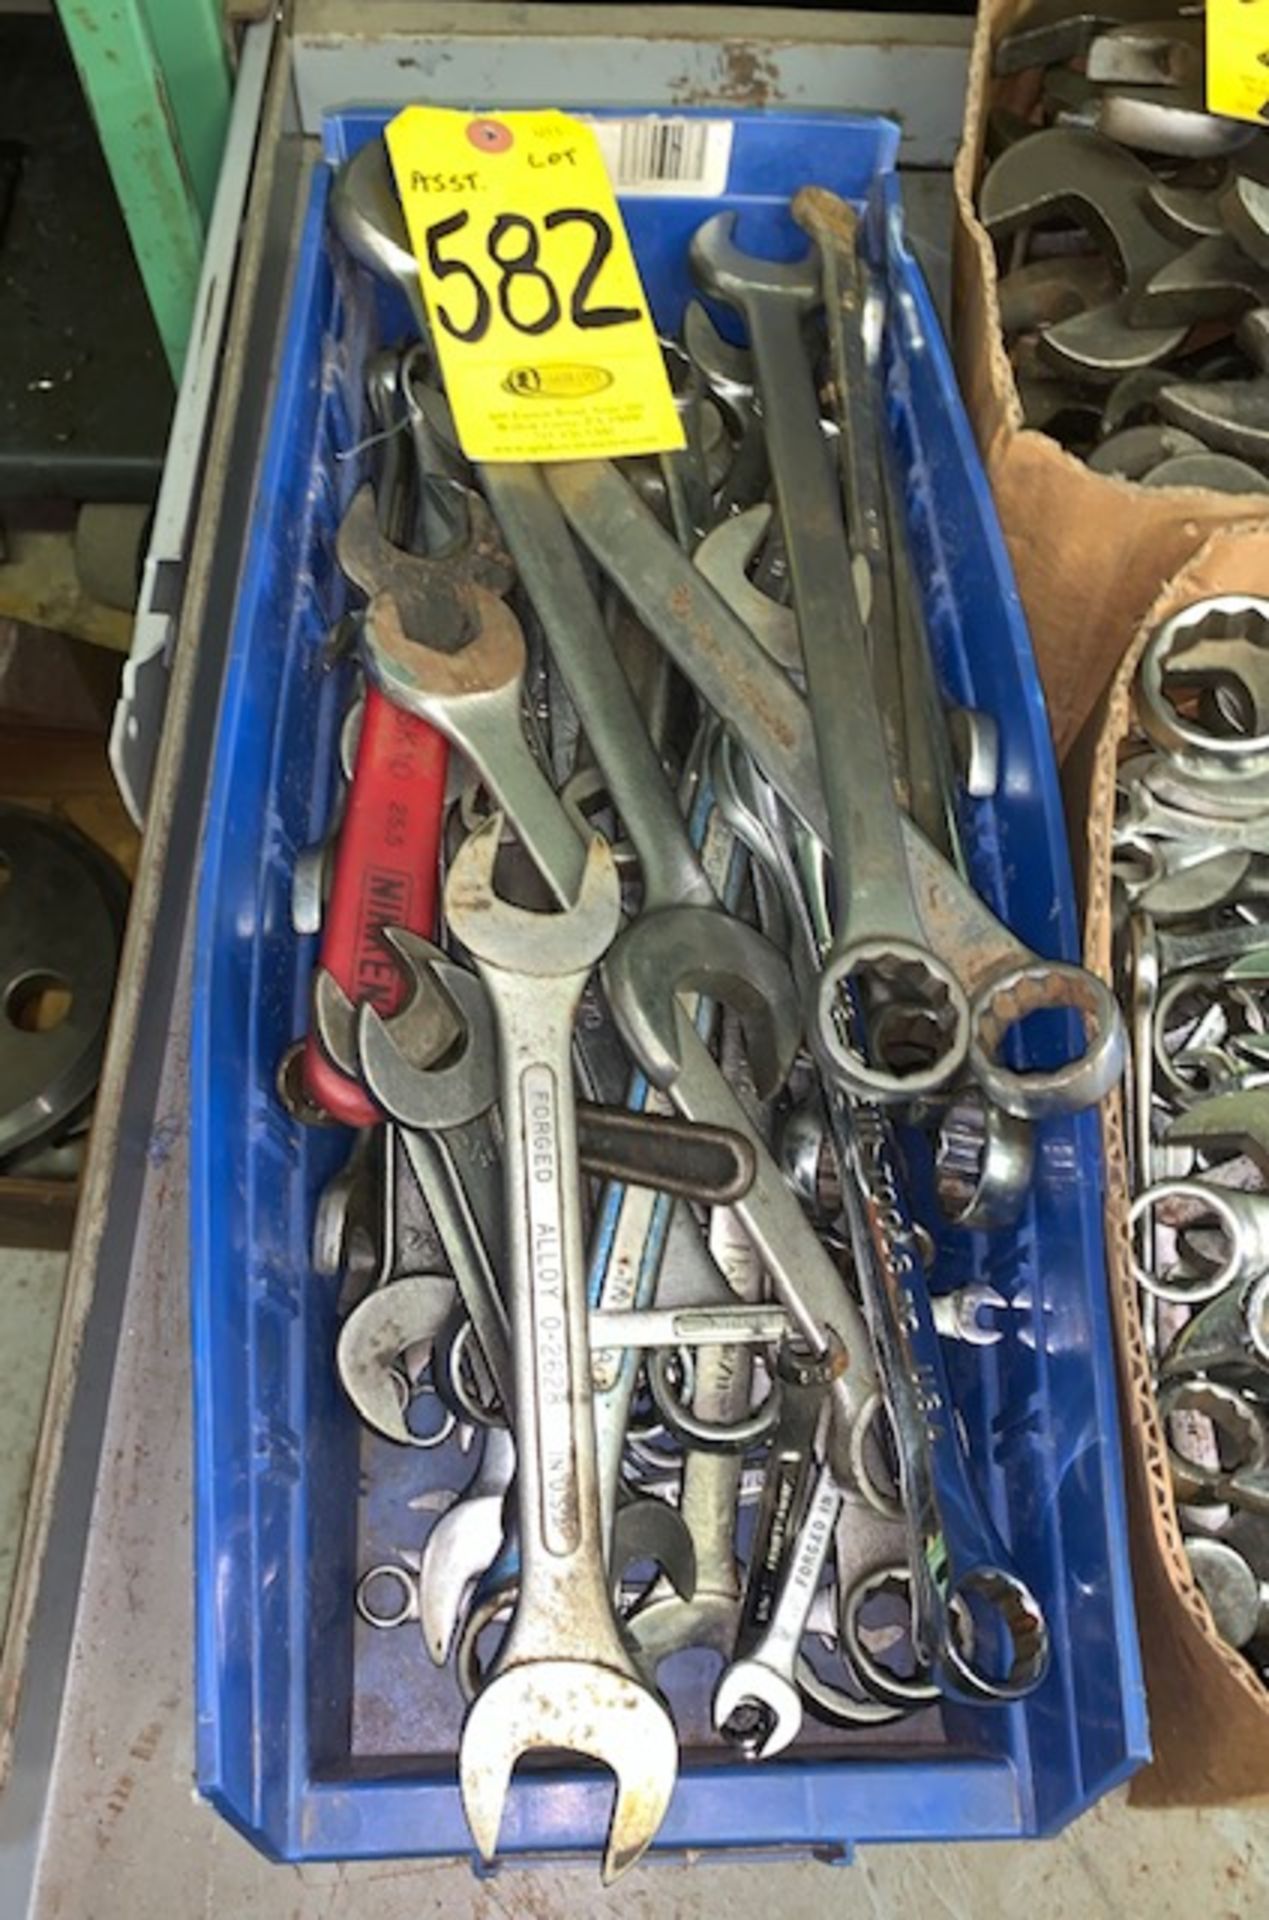 ASSORTED WRENCHES (3RD SHELF OF LOT 554 - LEFT SIDE)